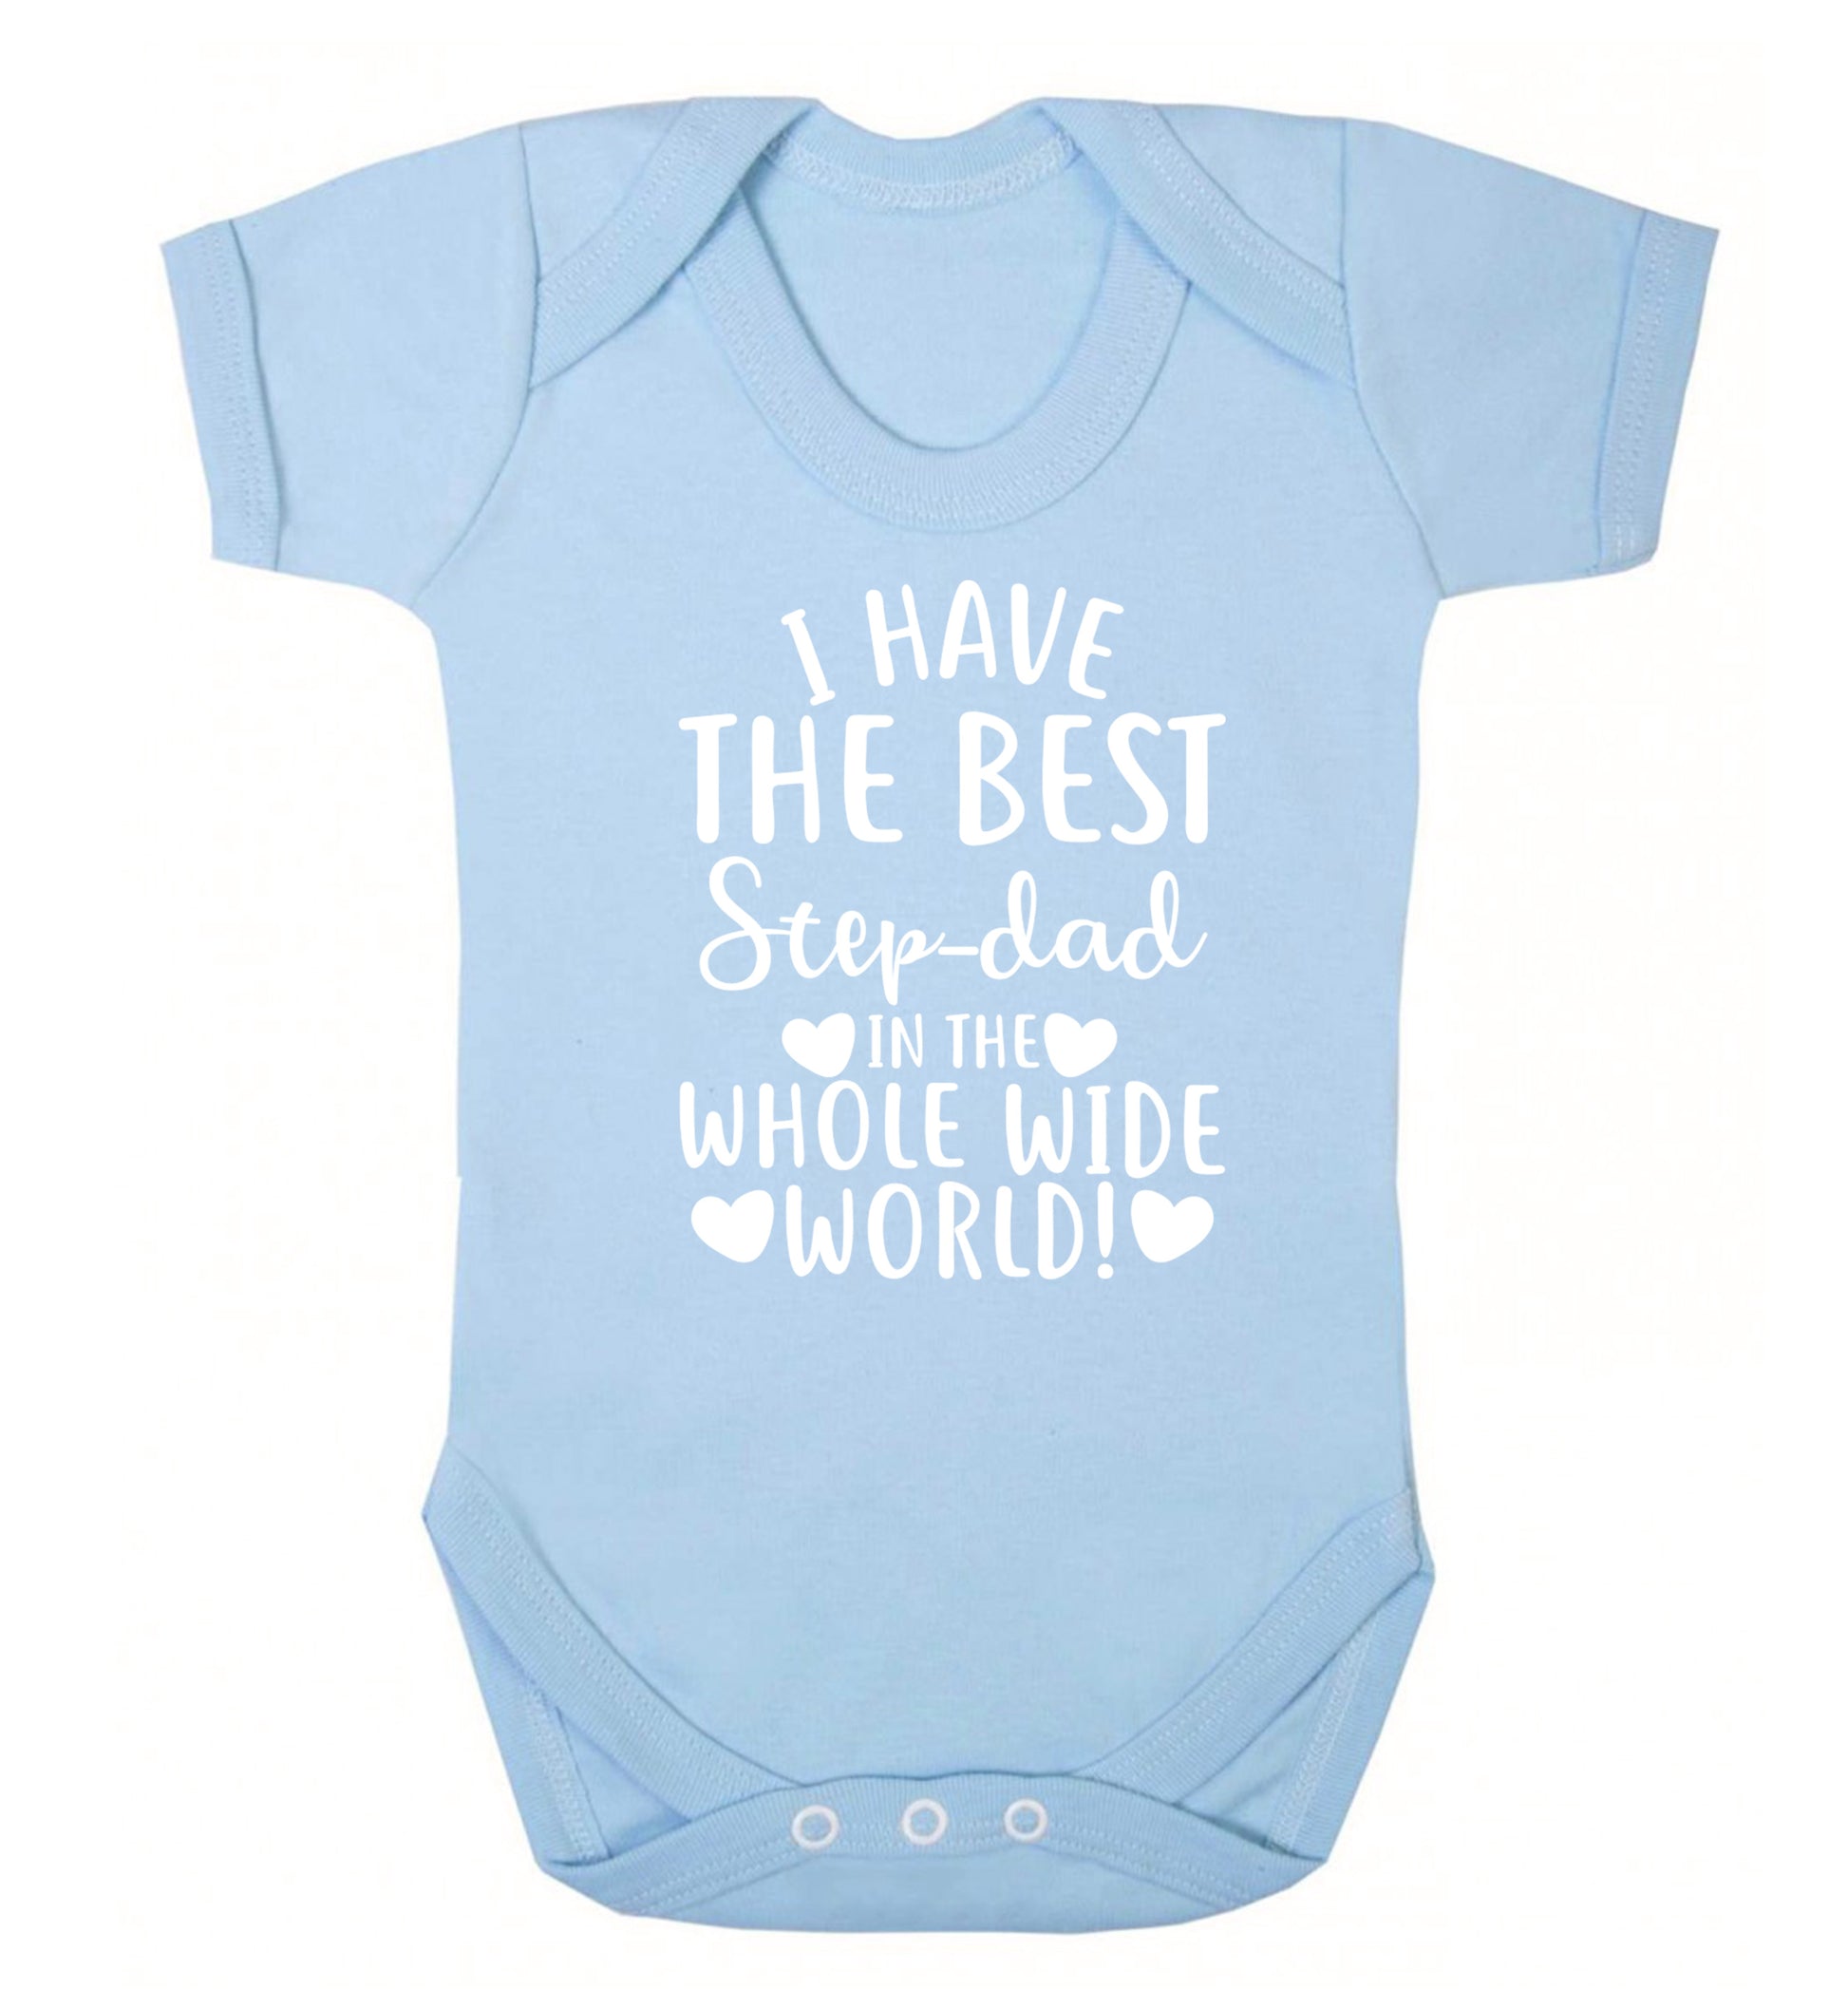 I have the best step-dad in the whole wide world! Baby Vest pale blue 18-24 months